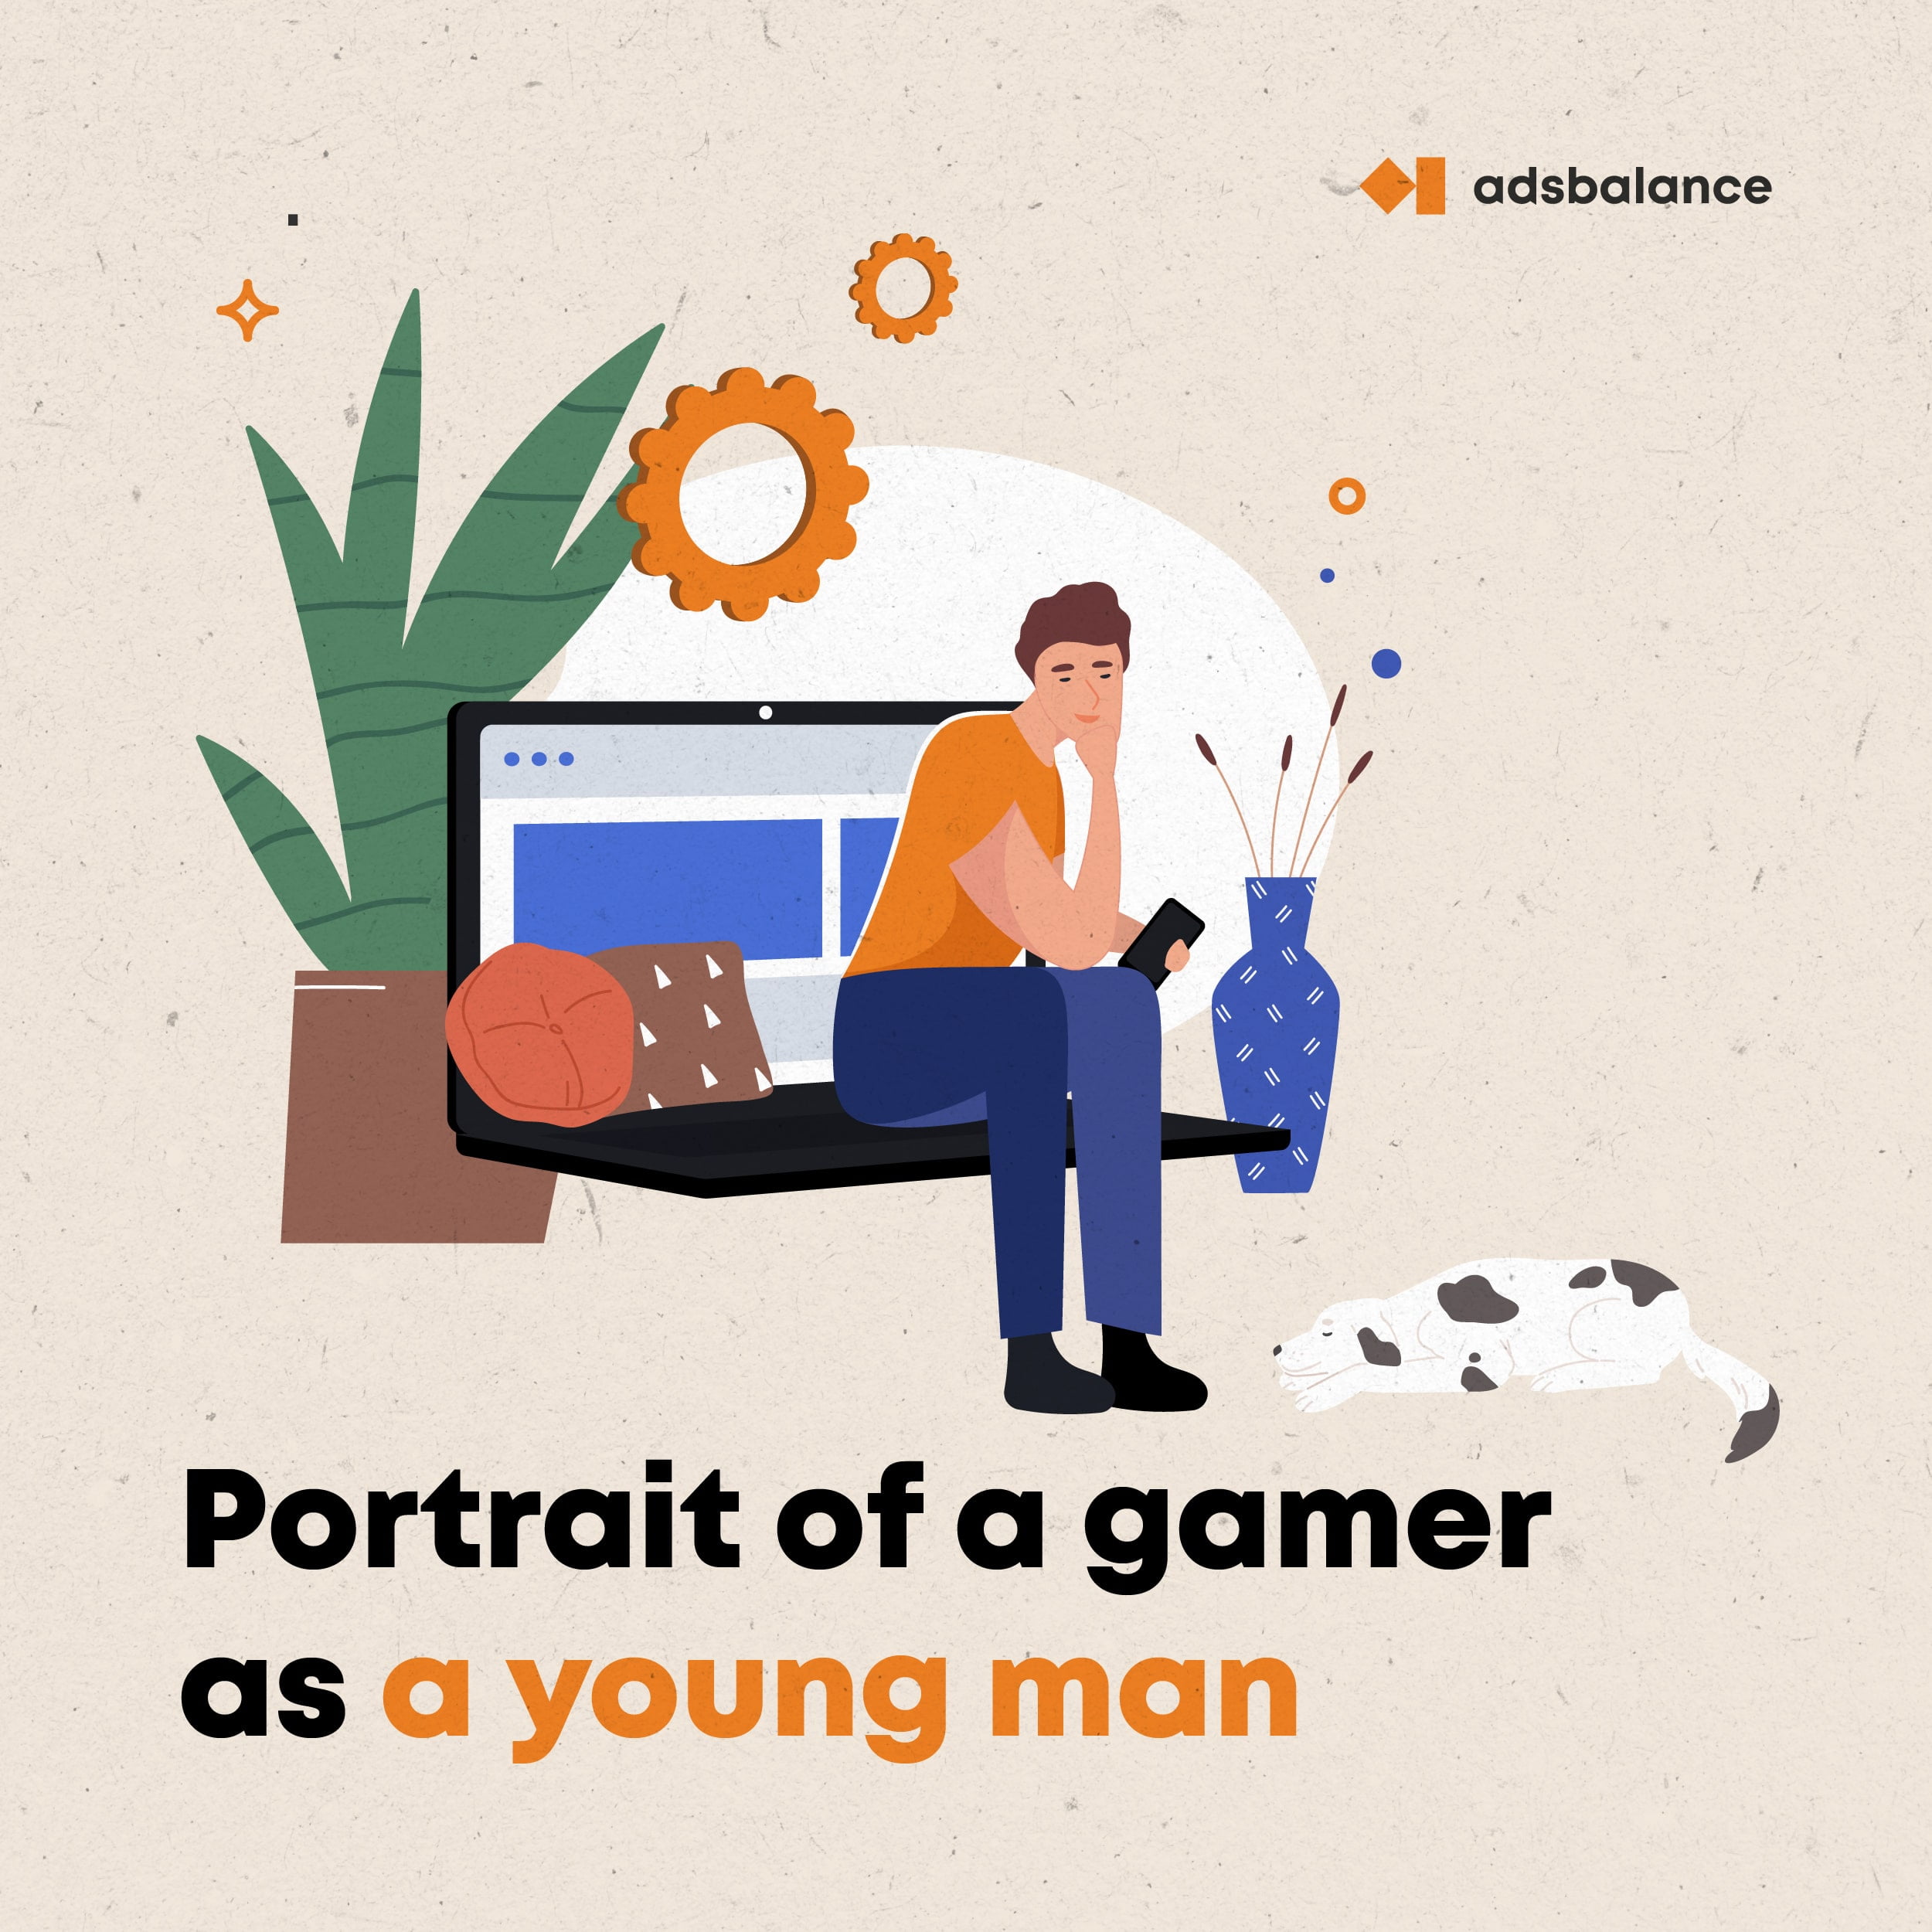 A portrait of a gamer as a young man